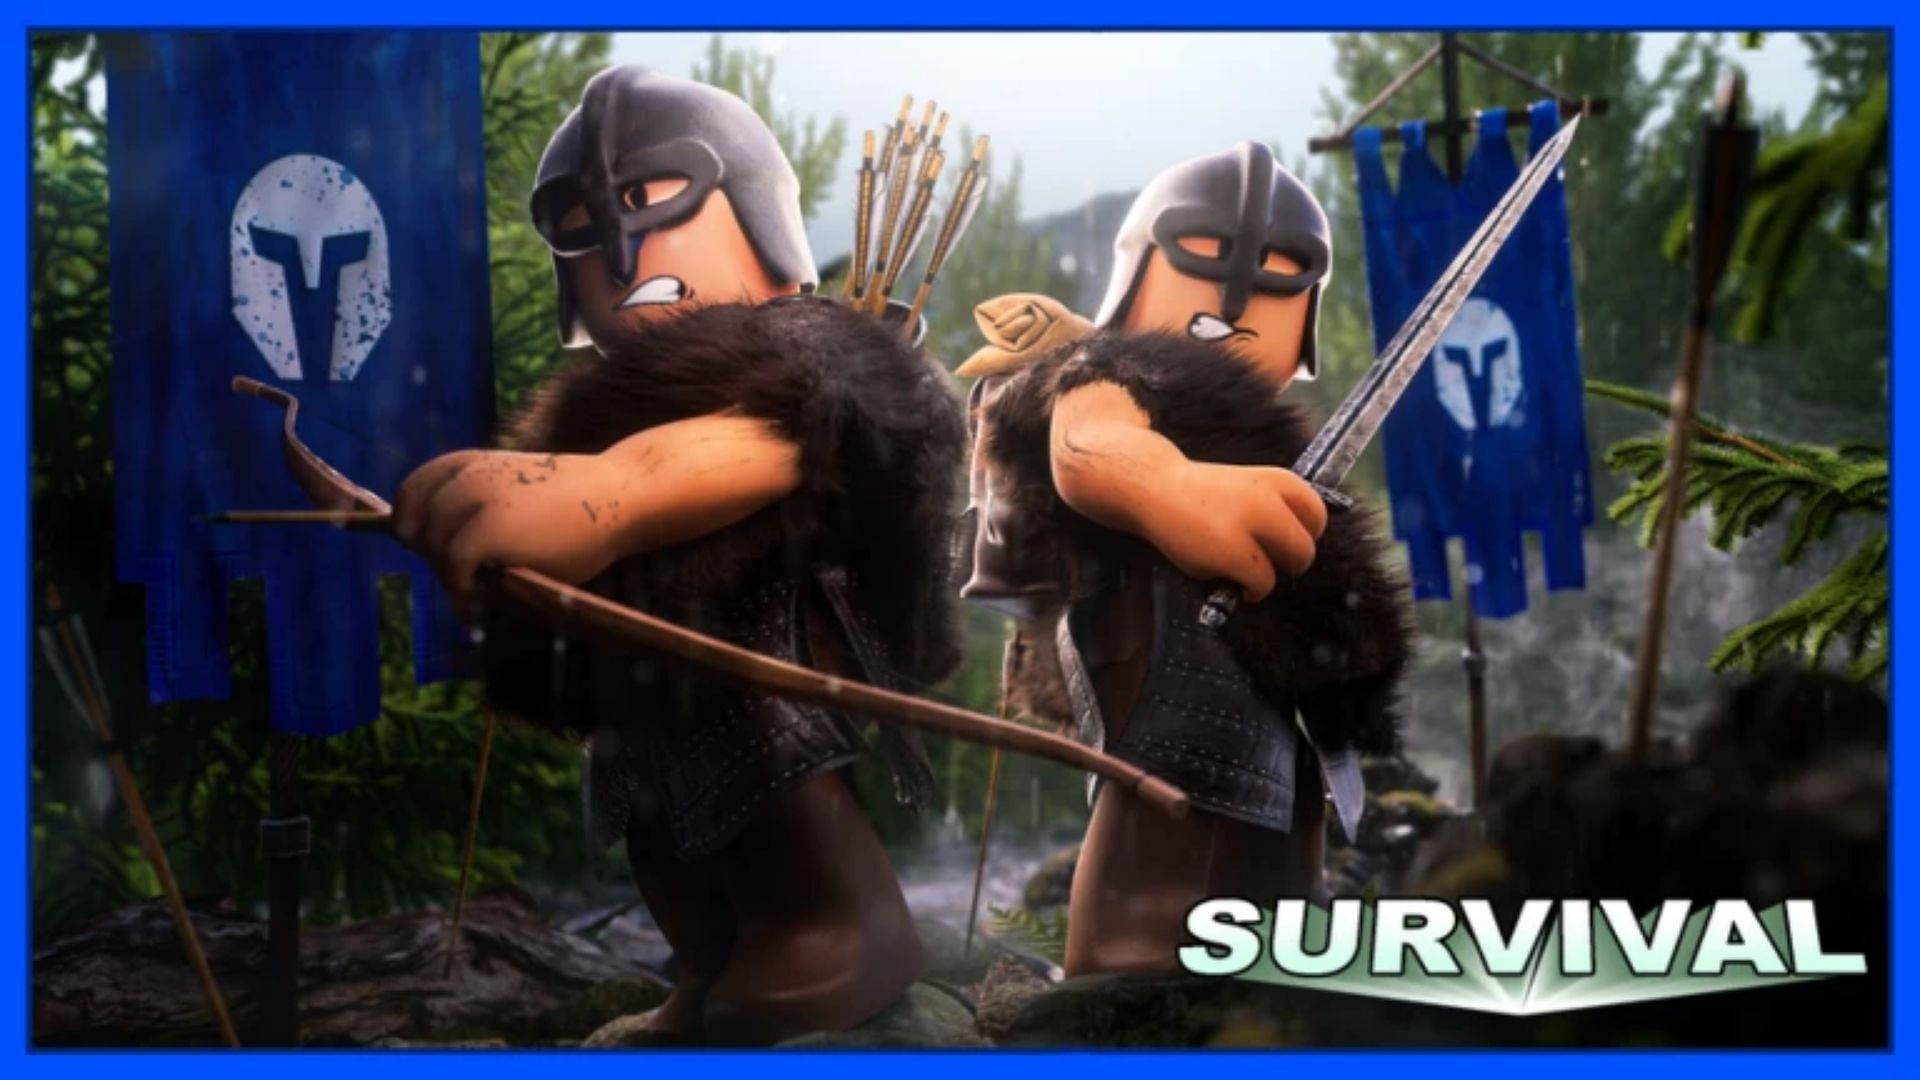 Official cover art for The Survival Game (Image via Roblox)